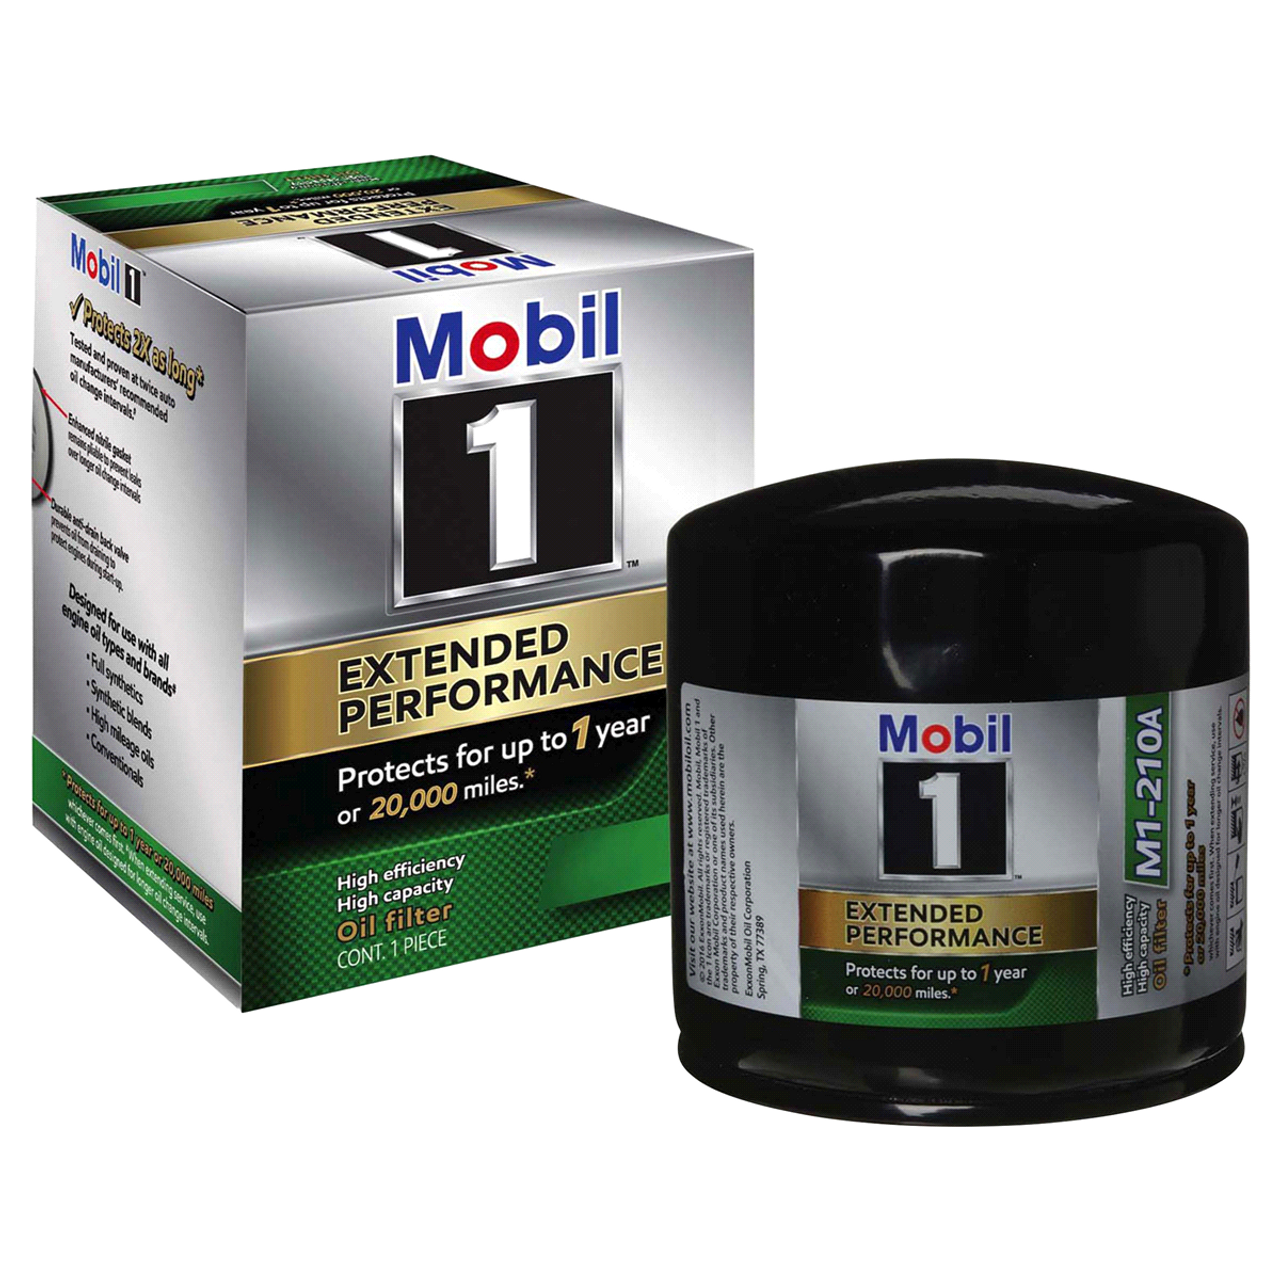 M1 210a Mobil 1 Ep Oil Filter Protects Up To 1 Year Or 32000 Km